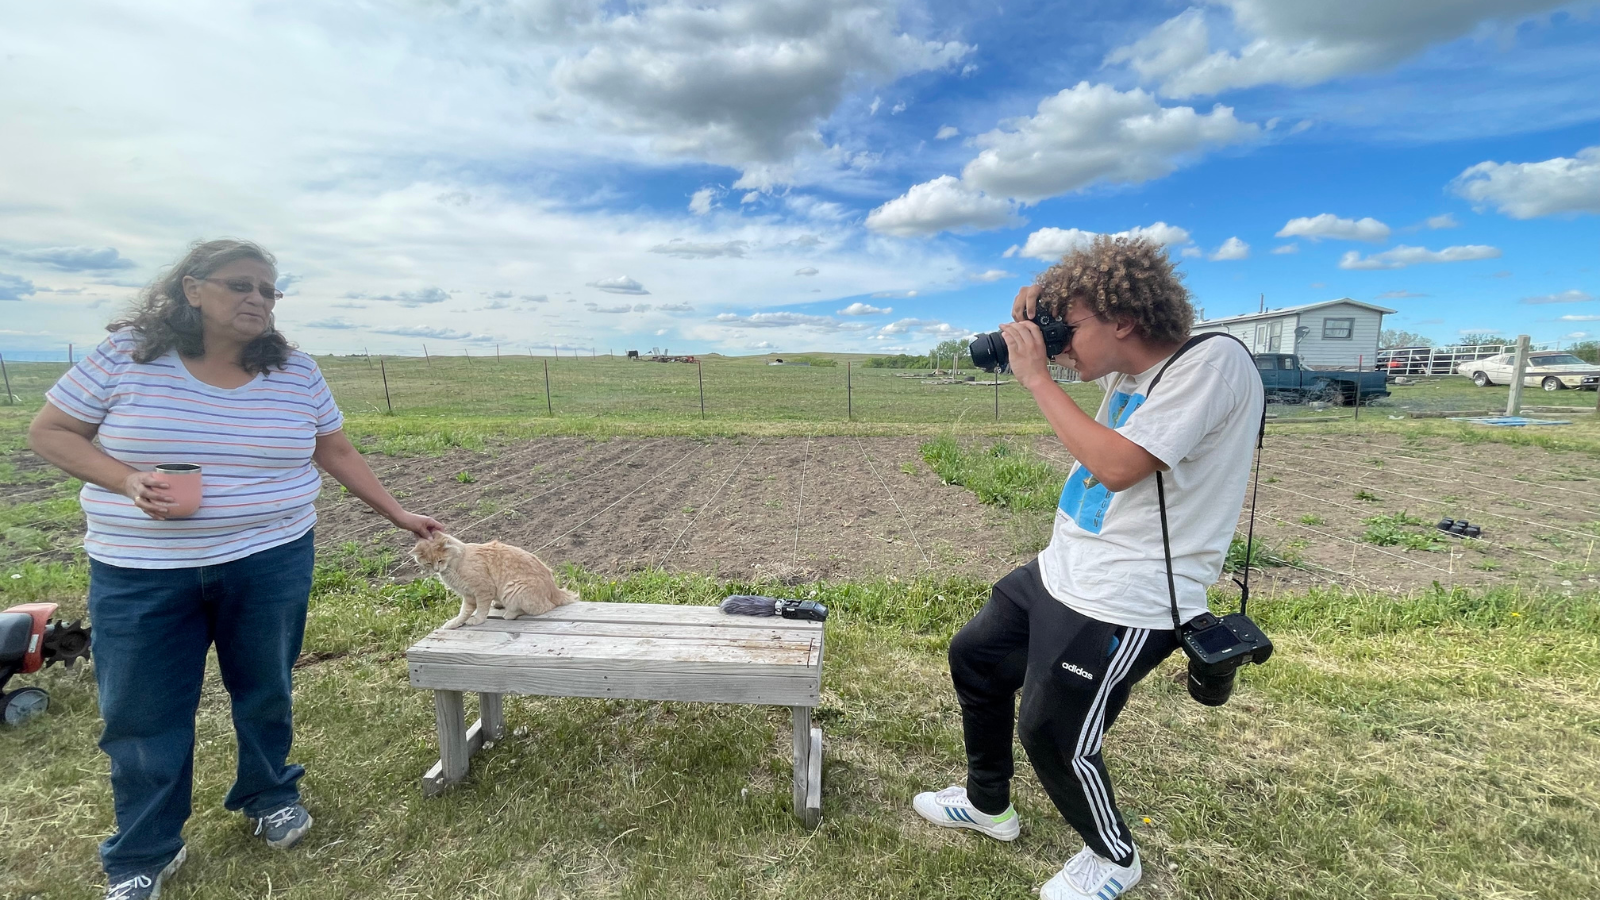 Student shooting a photograph of two individuals in front of a field.